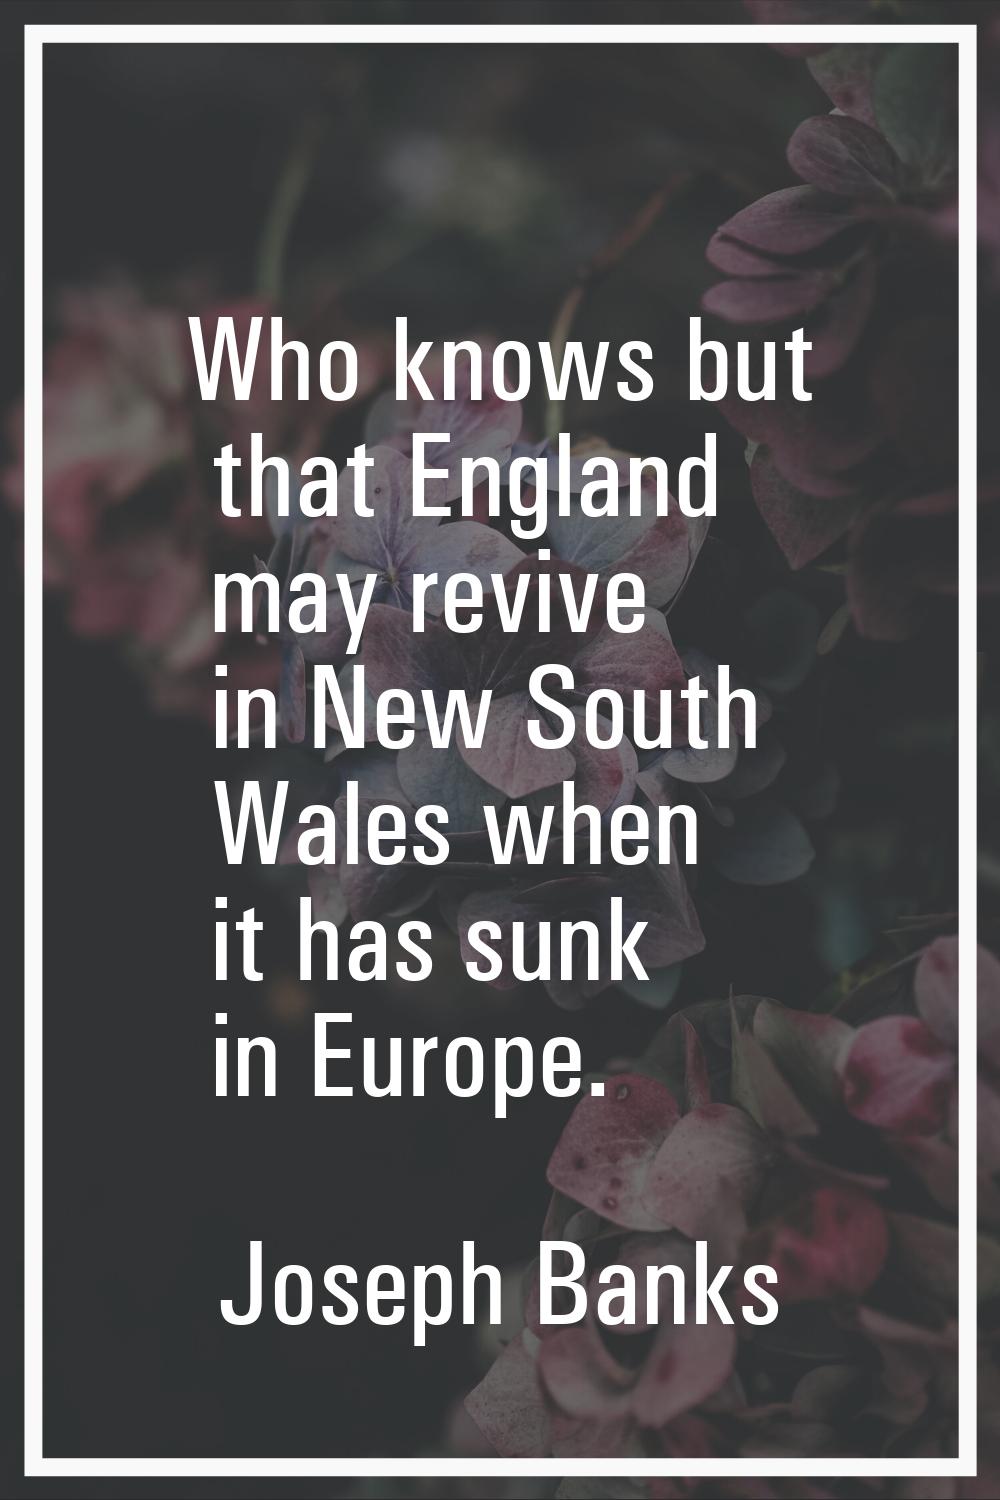 Who knows but that England may revive in New South Wales when it has sunk in Europe.